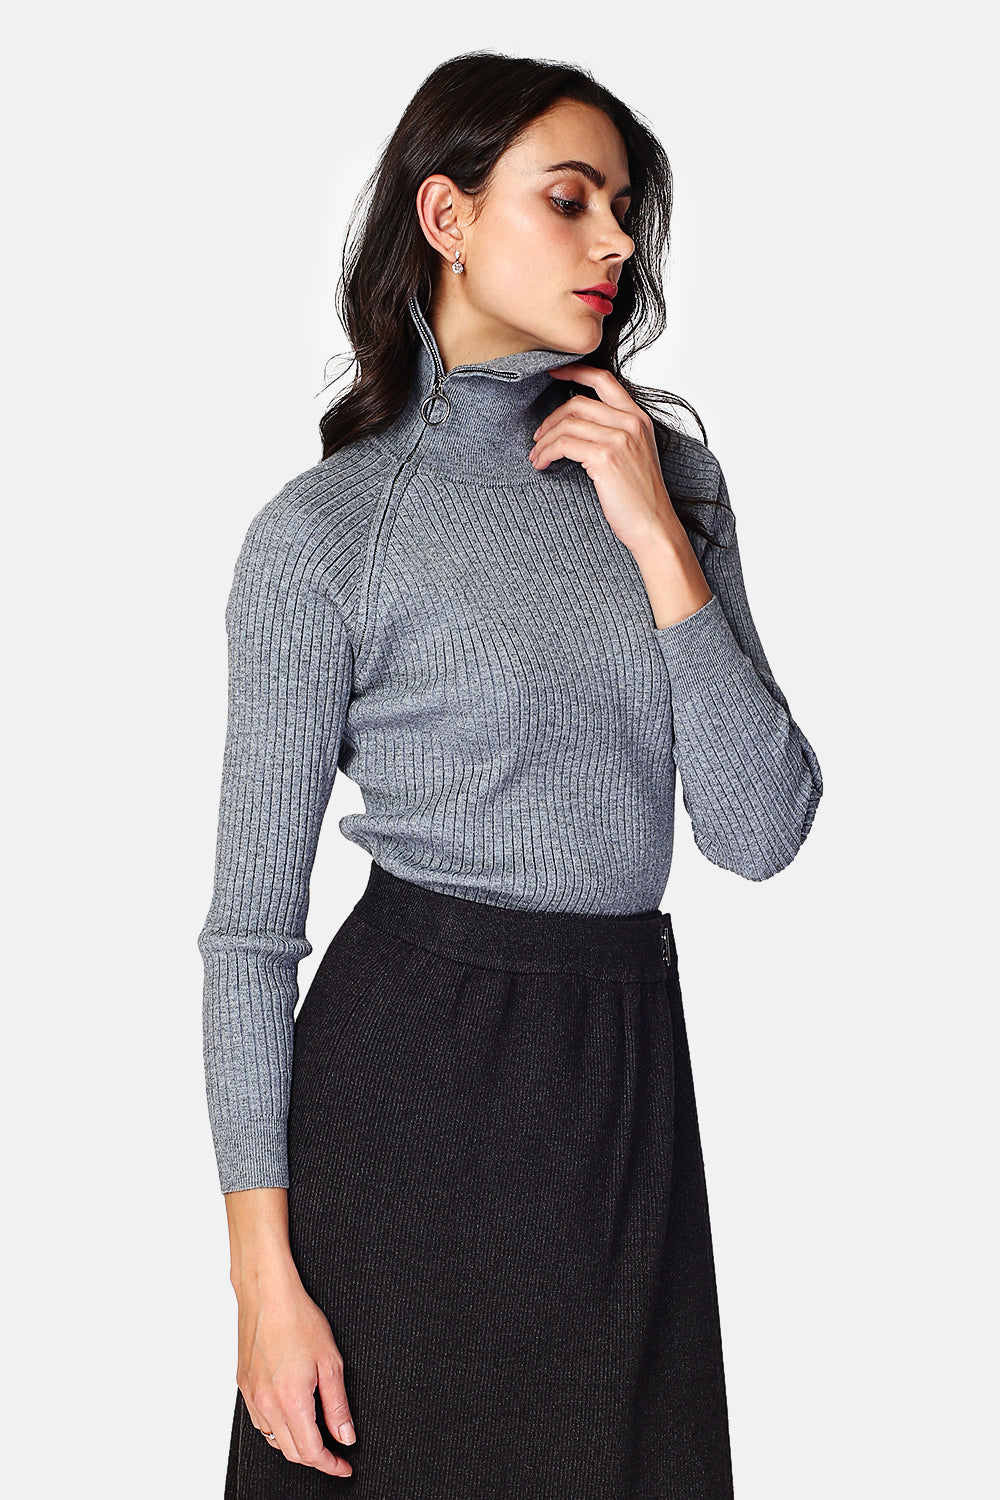 High neck sweater closed with a zip, fancy knit